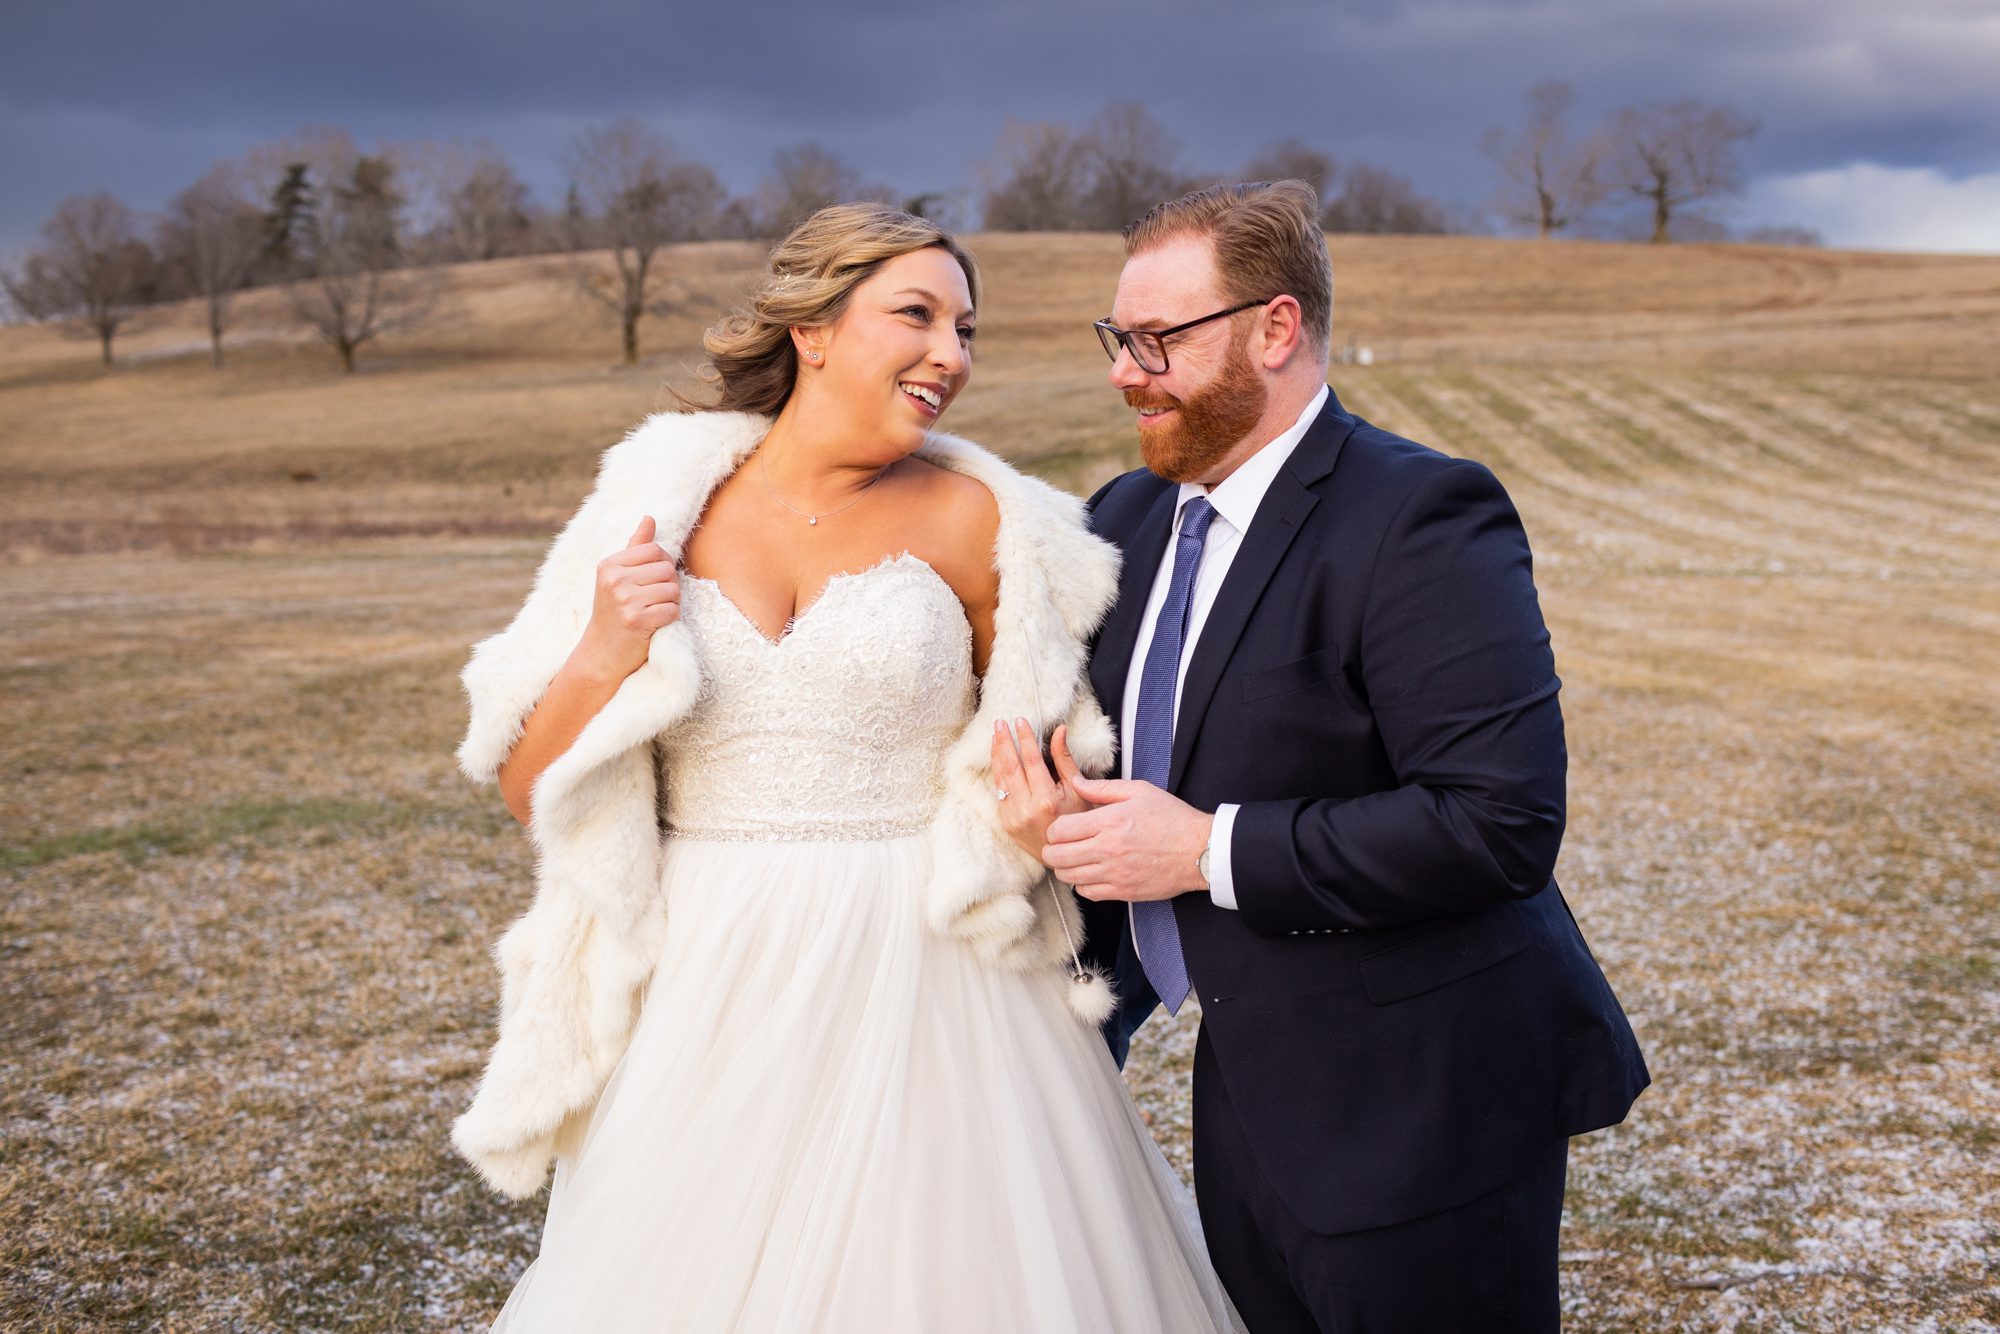 classic winter white wedding in new england bride with fur coat